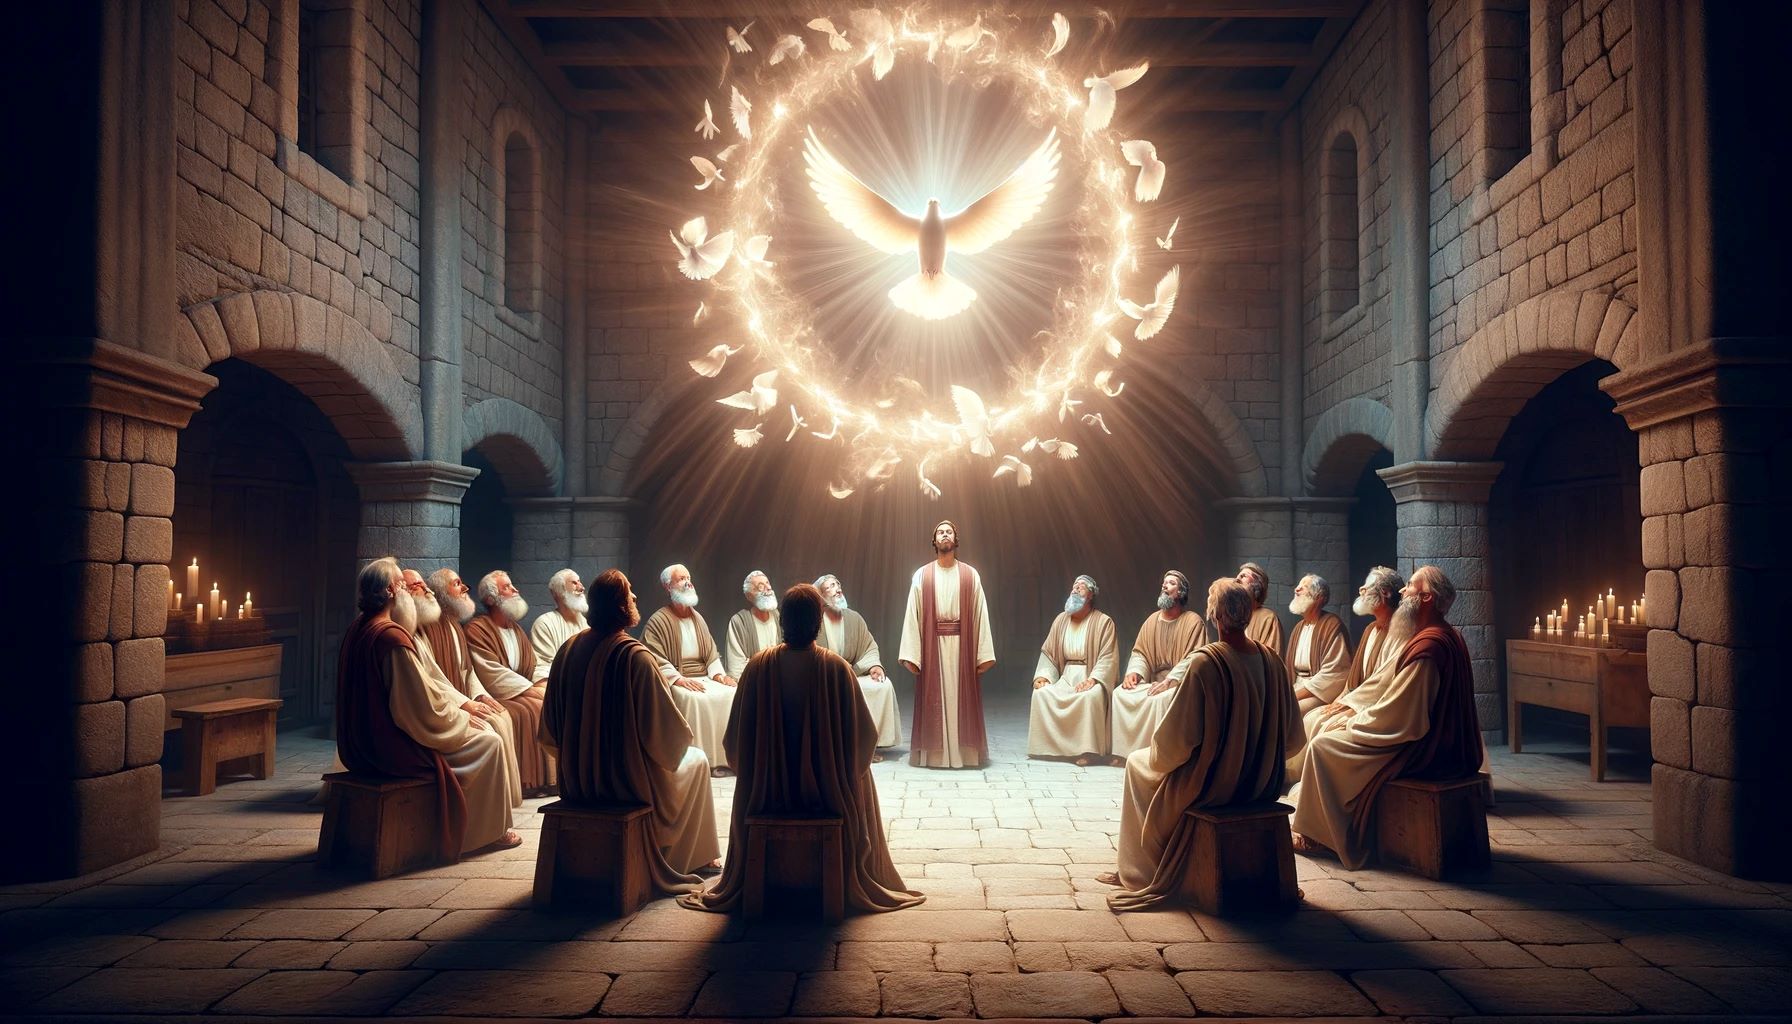 What Happened When The Holy Spirit Descended On The Apostles